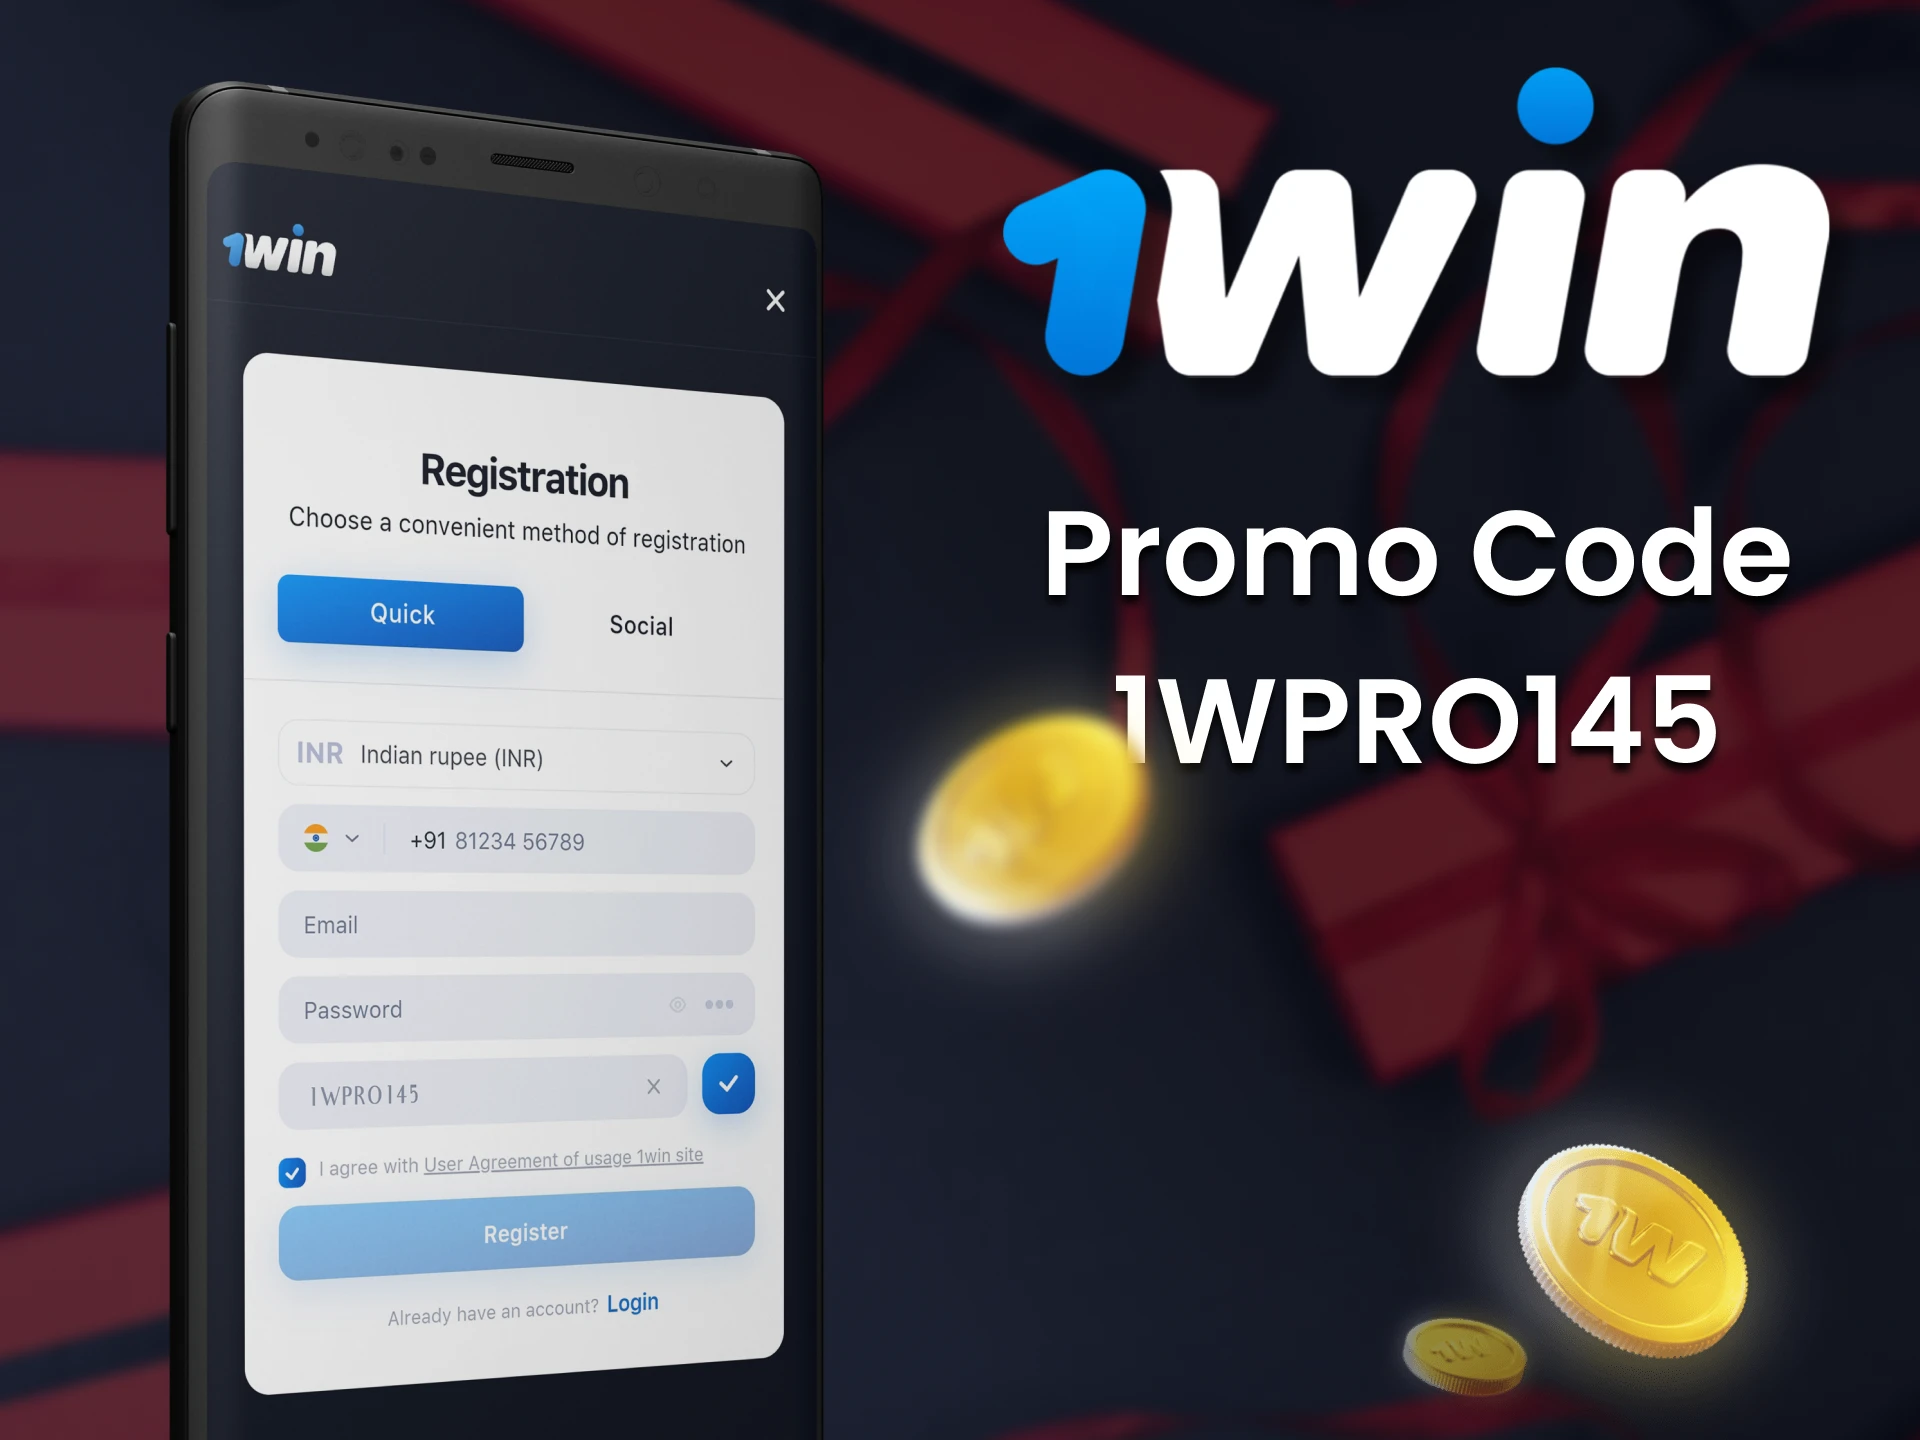 Use the promo code in the 1win app to get a bonus.